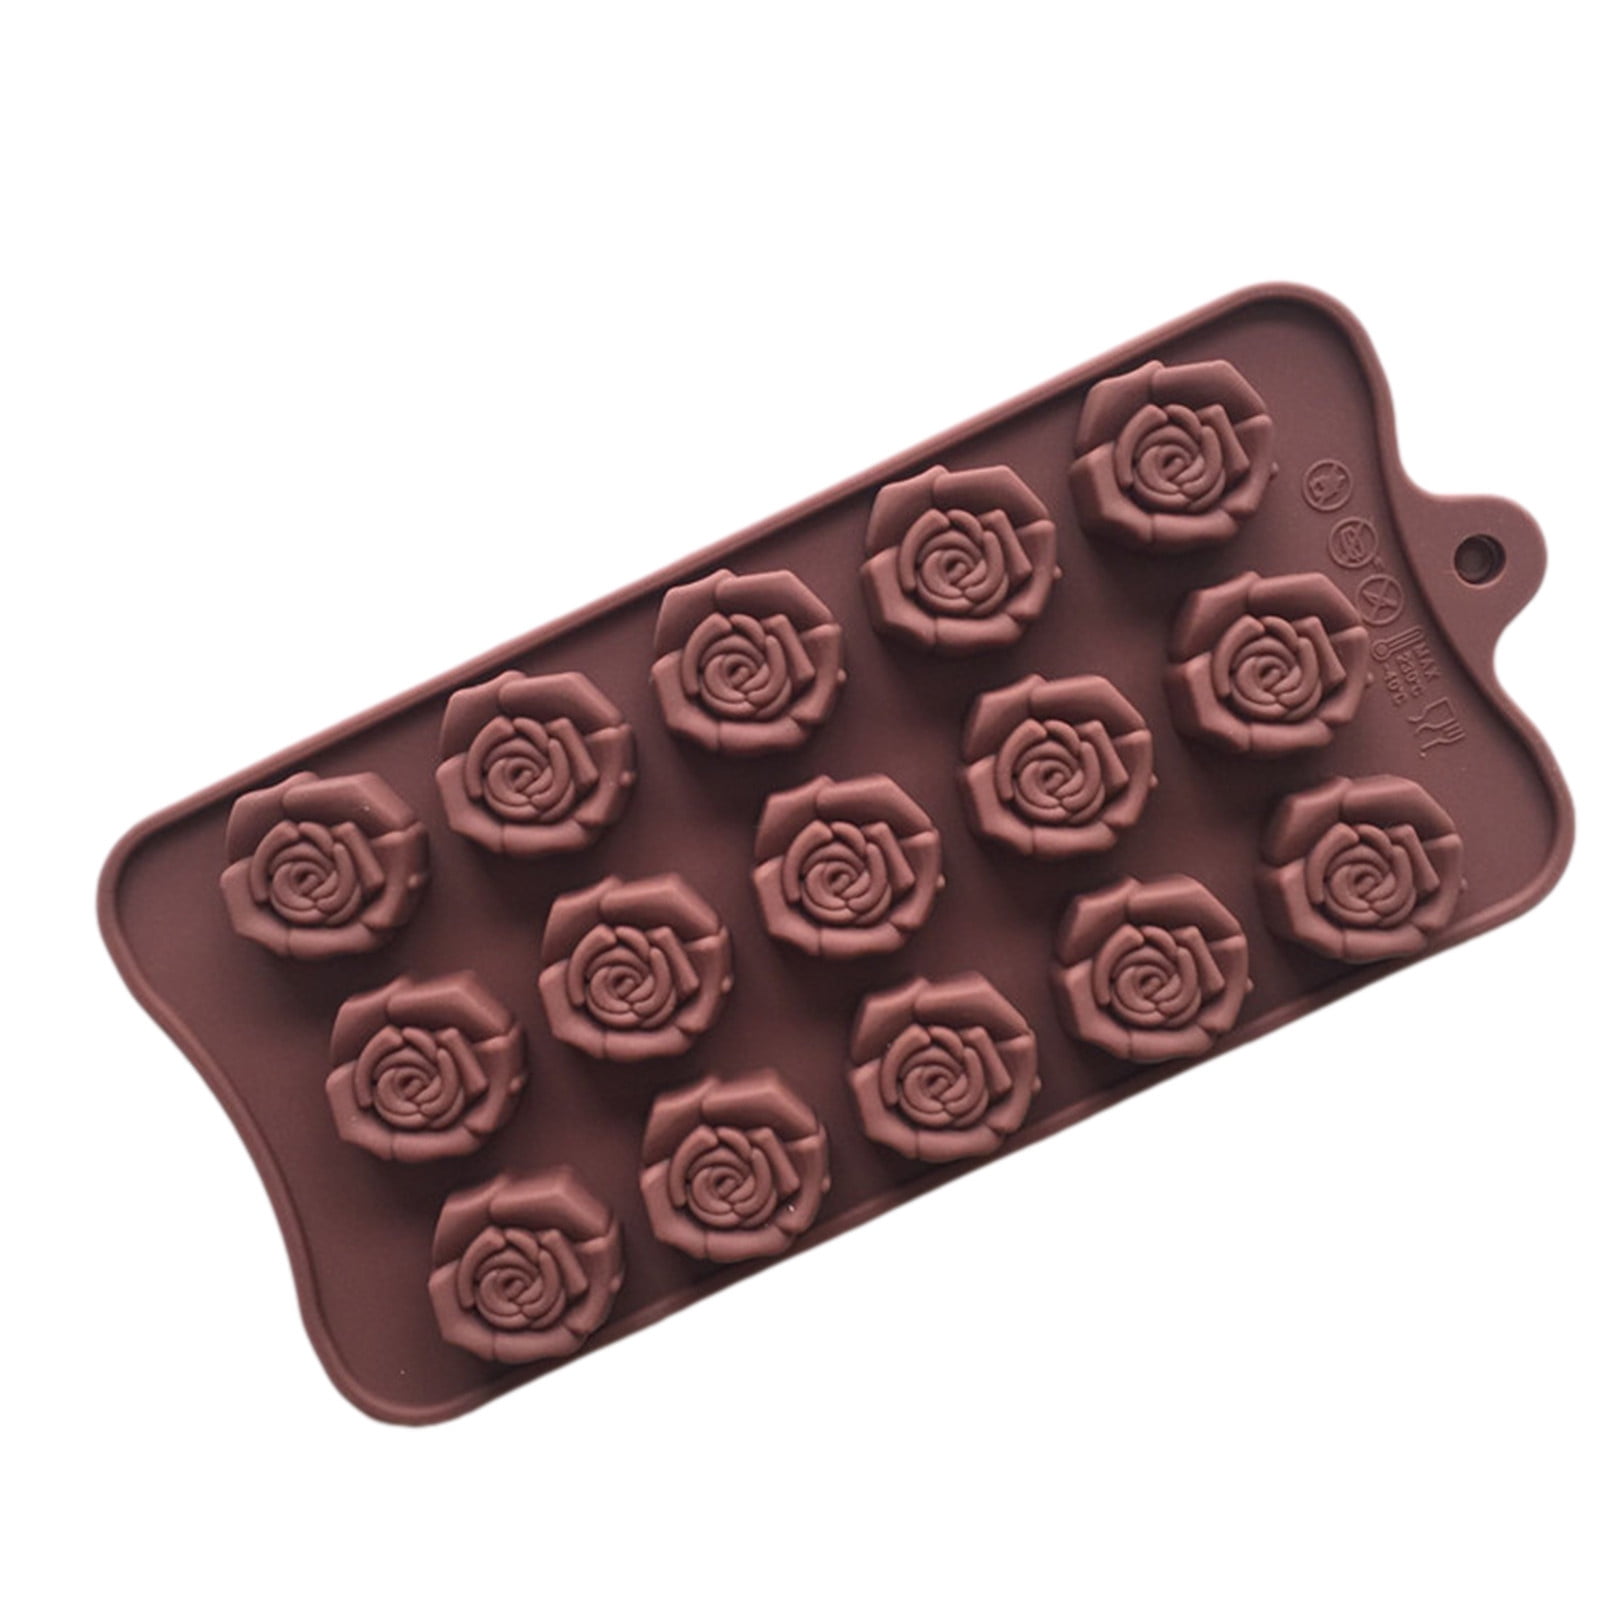 15 Cavity 3D Diamond Heart Silicone Mold For Candy Chocolate